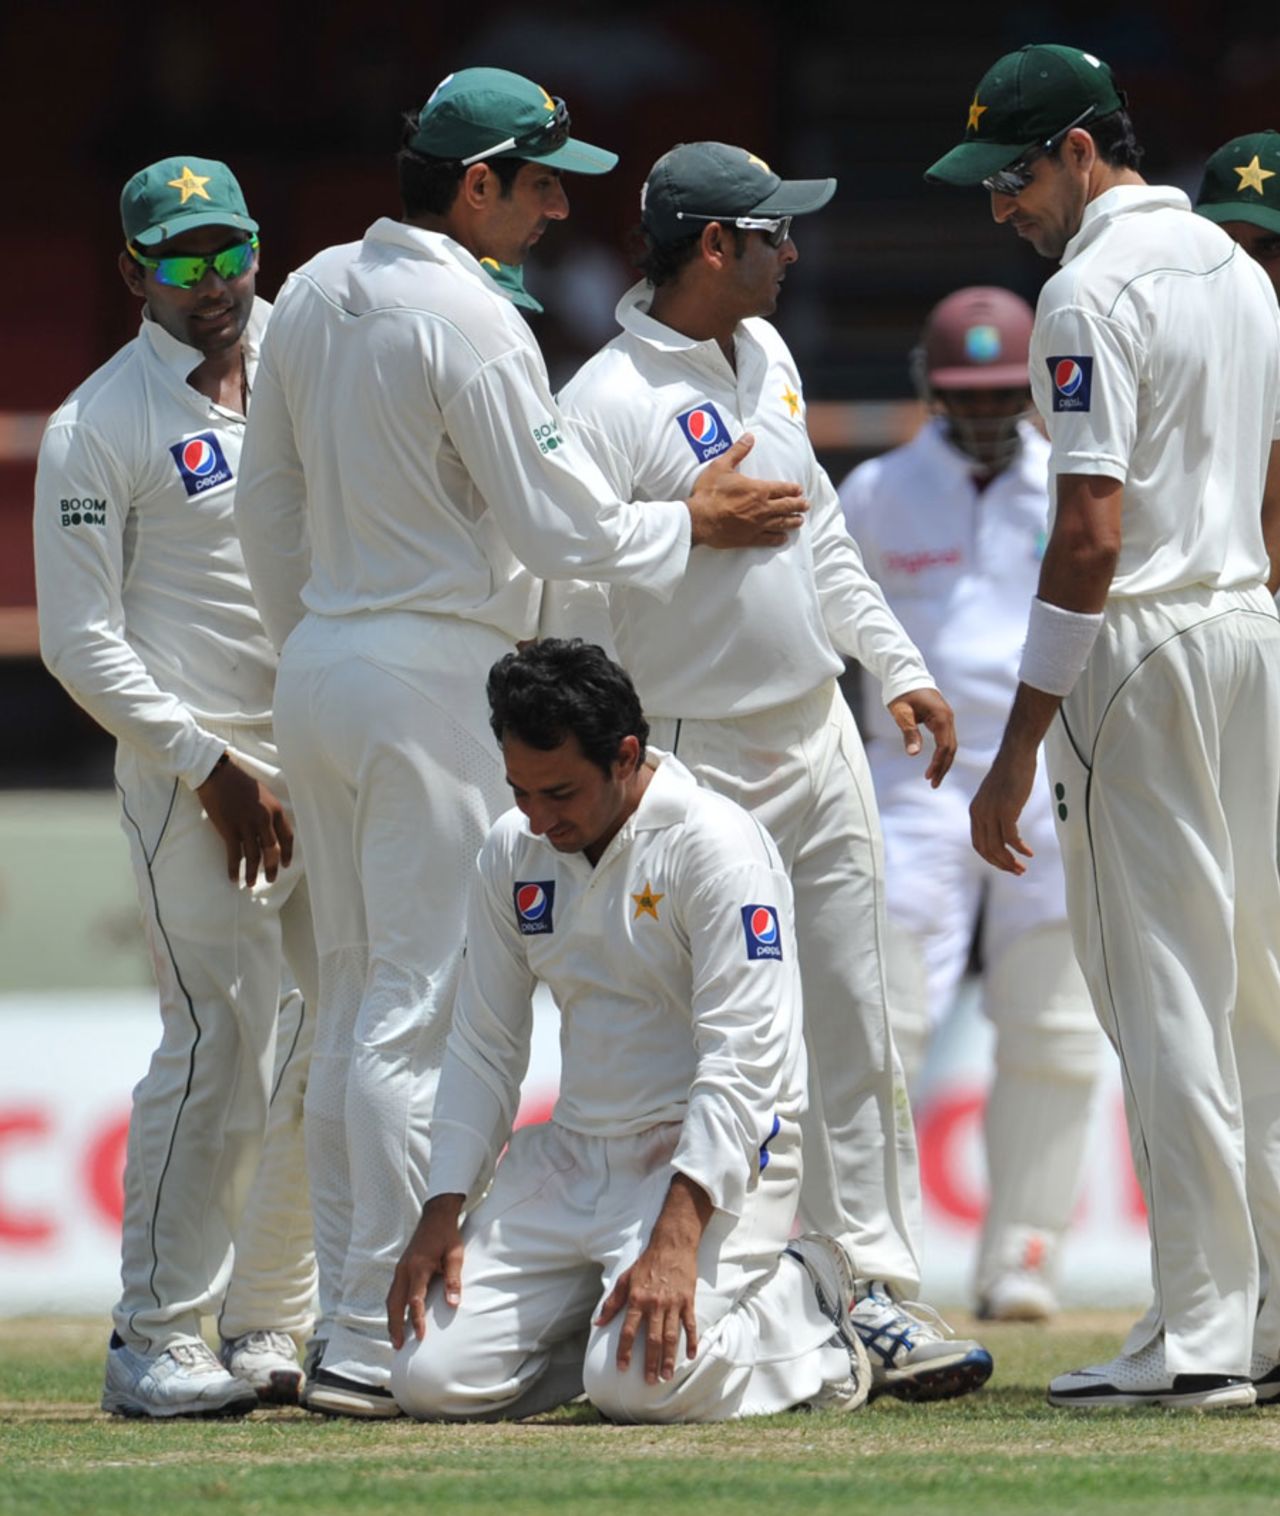 Saeed Ajmal reacts to completing his first ten-wicket haul in Tests, West Indies v Pakistan, 1st Test, Providence, 3rd day, May 14, 2011